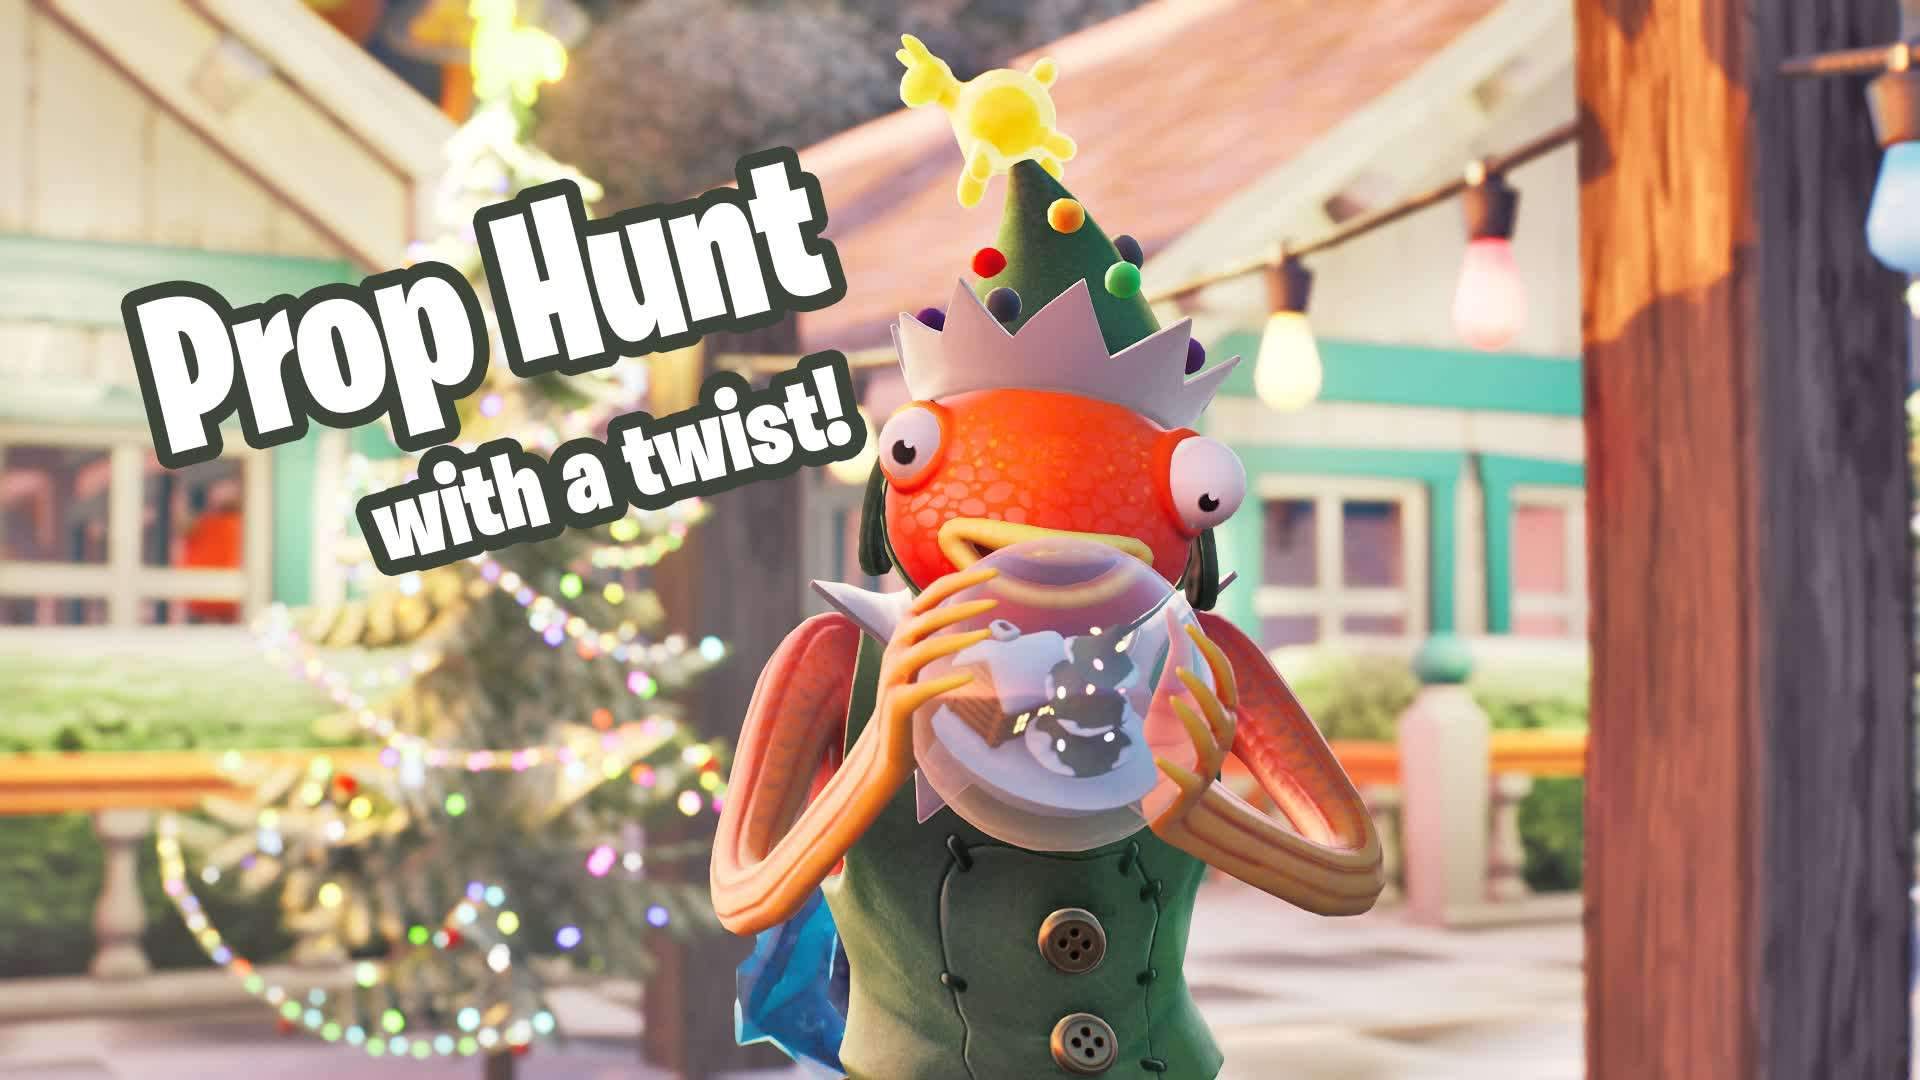 Holiday bakery prop hunt